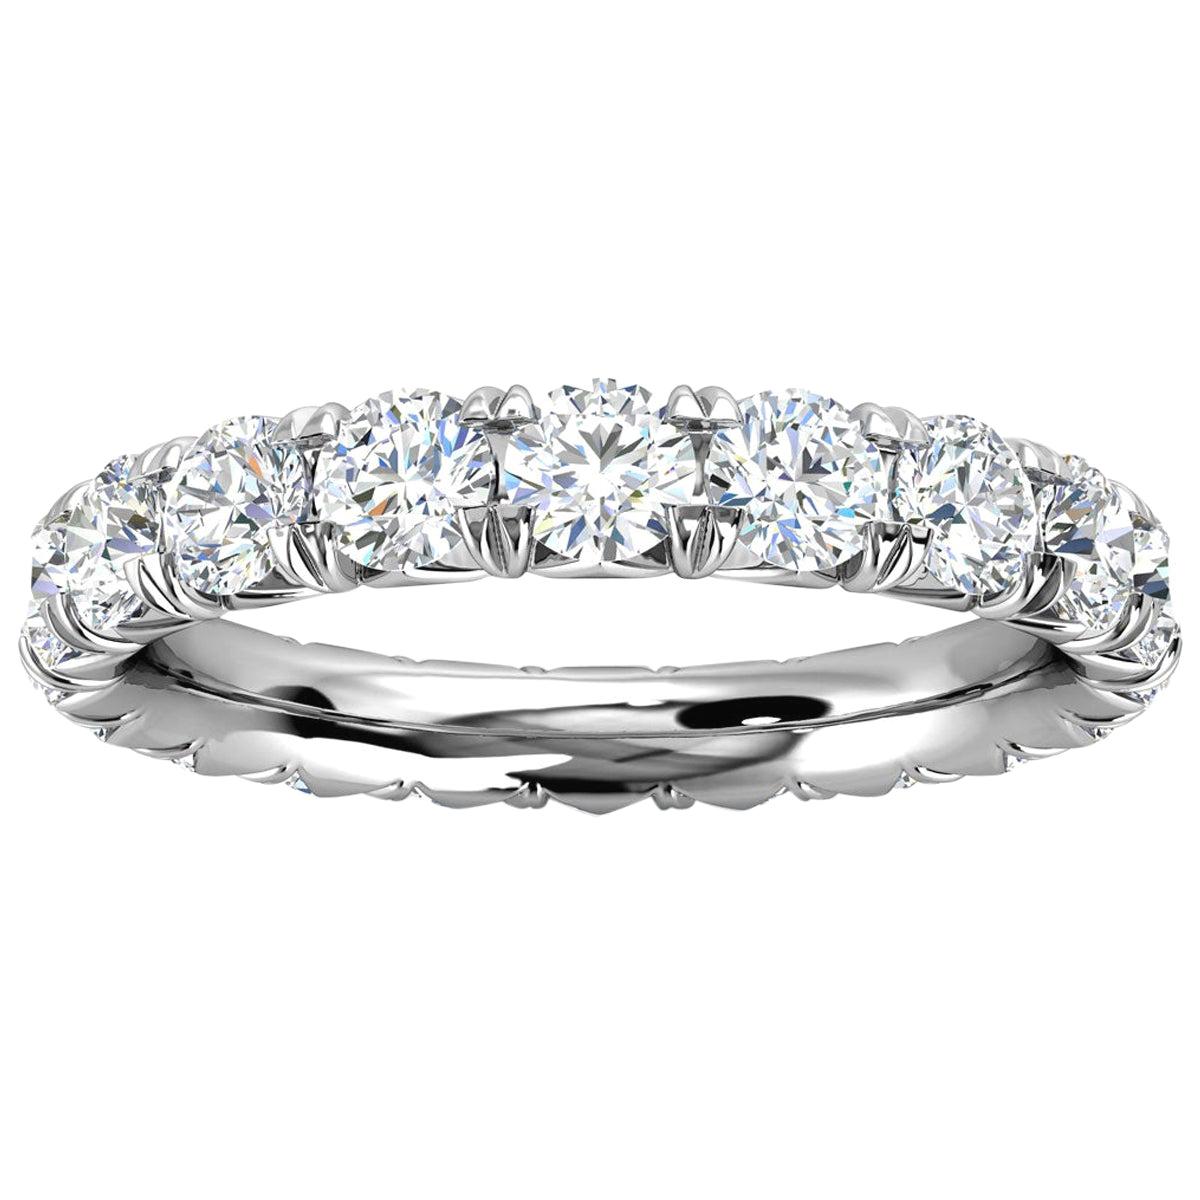 For Sale:  14k White Gold Mia French Pave Diamond Eternity Ring '2 Ct. Tw'